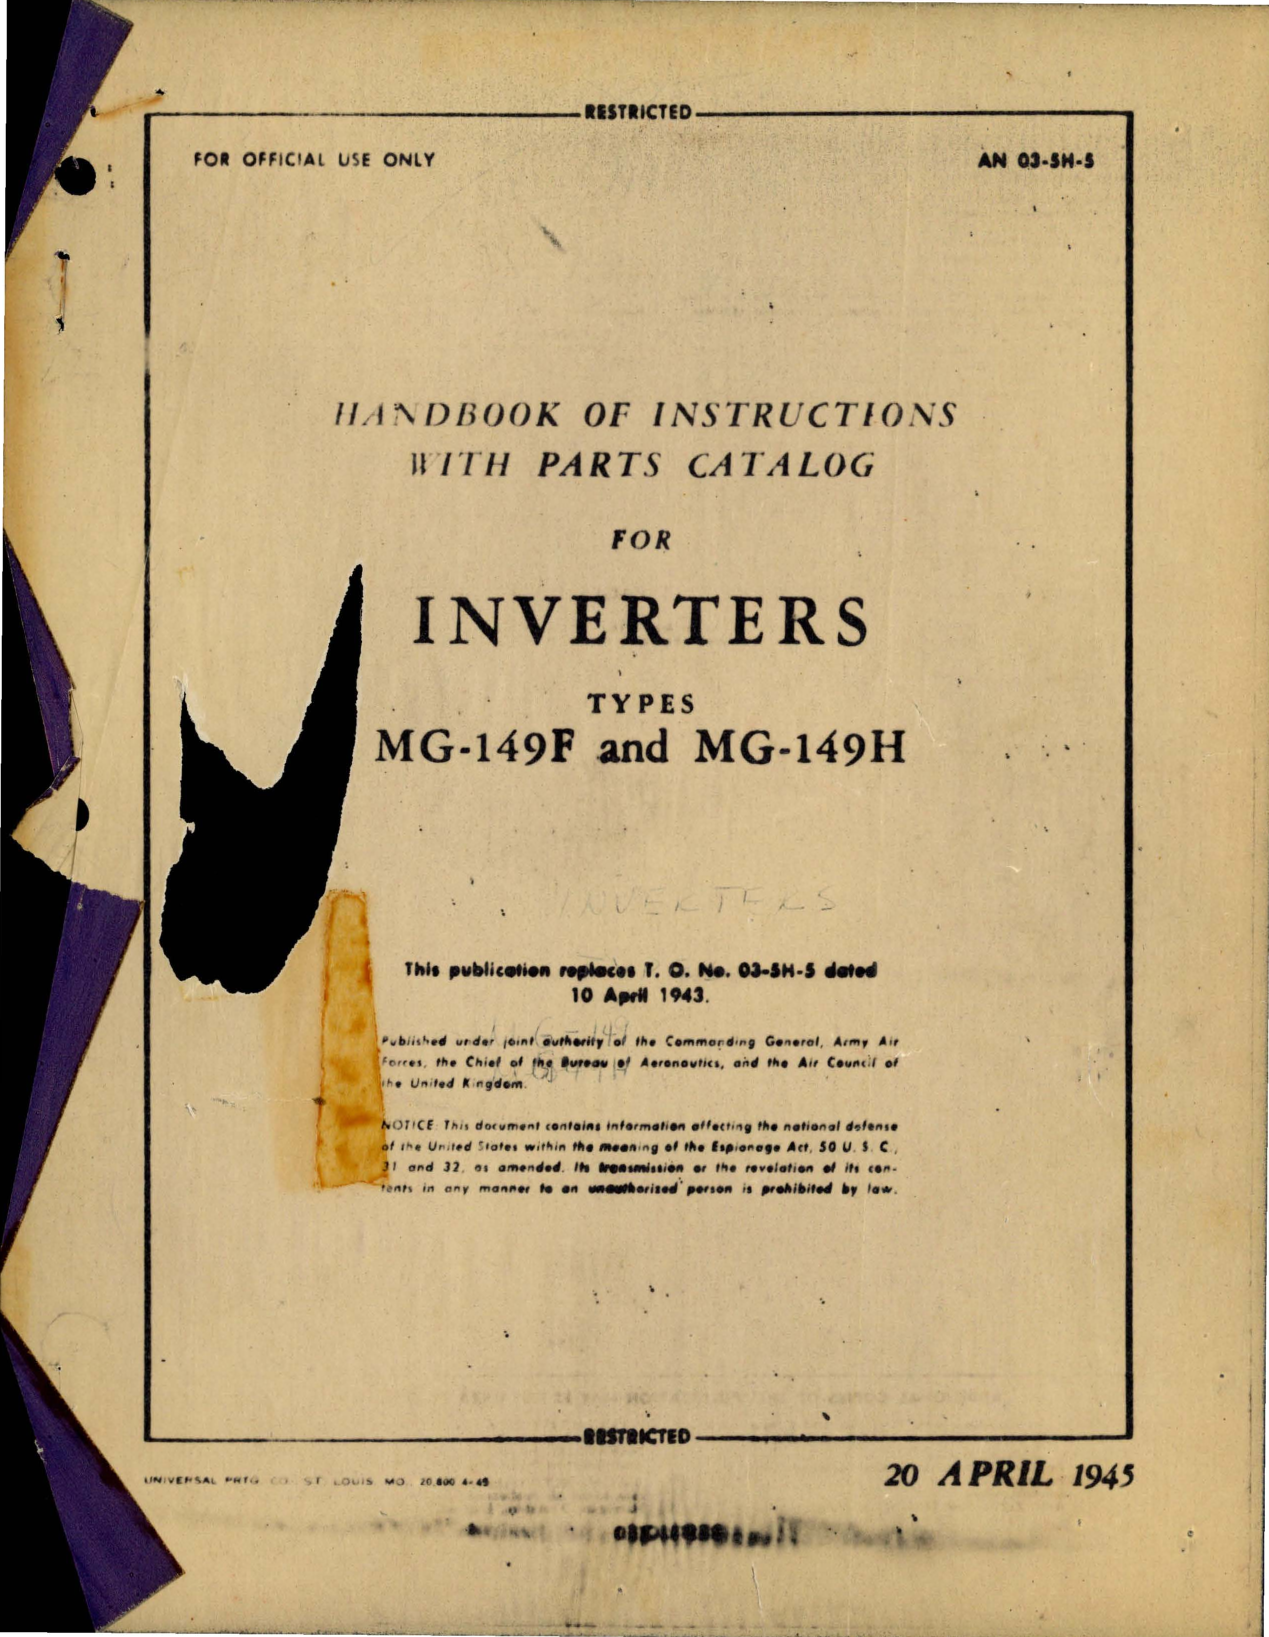 Sample page 1 from AirCorps Library document: Instructions with Parts Catalog for Inverters - Types MG-149F and MG-149H 